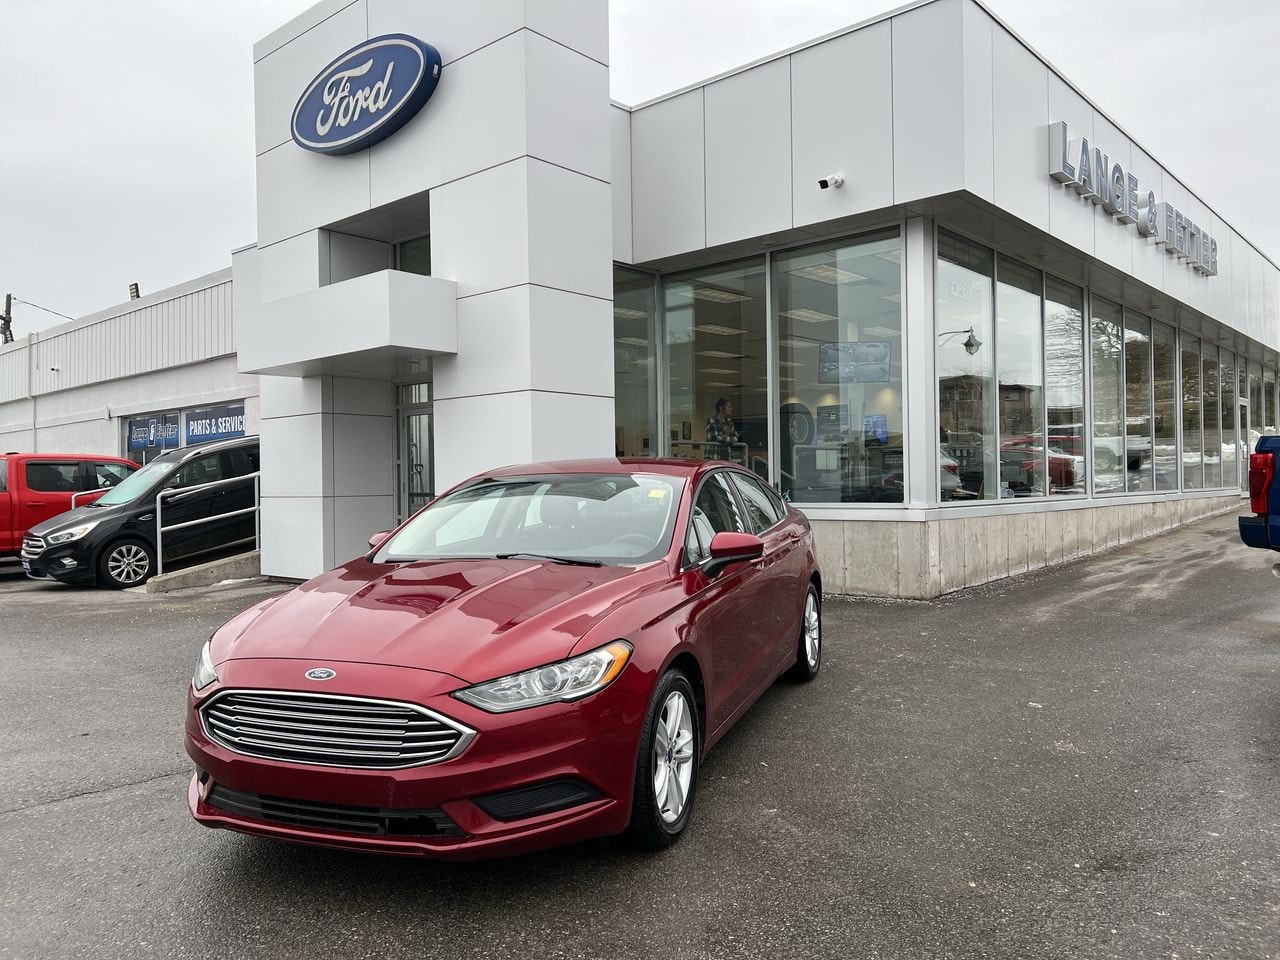 2018 Ford Fusion - P20810 Full Image 1